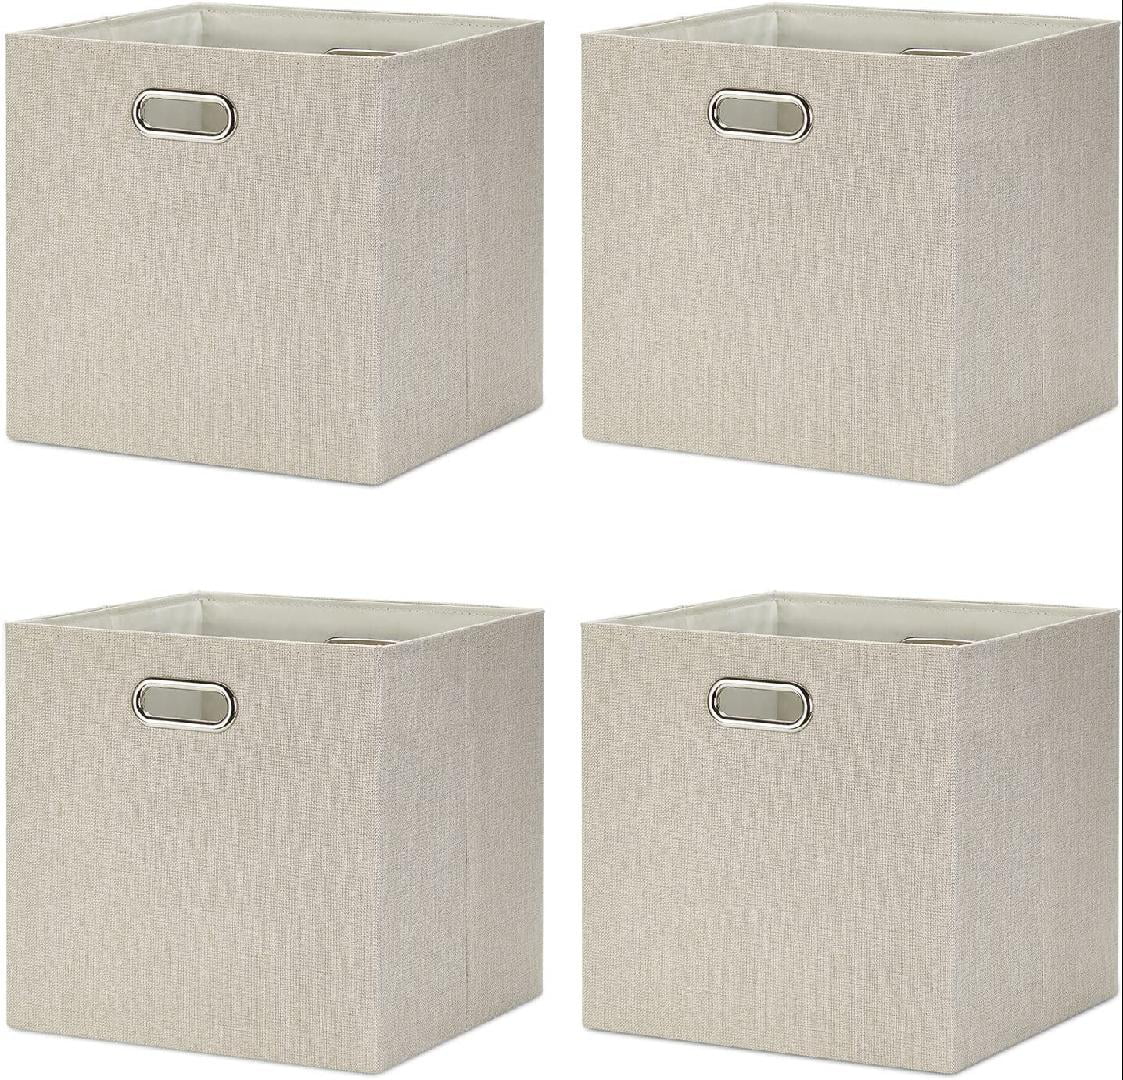 homyfort Cube Storage Organizer Bins 12x12 - Fabric Storage Cubes Bin  Foldable Baskets Square Box with Labels and Dual Plastic Handles for Shelf